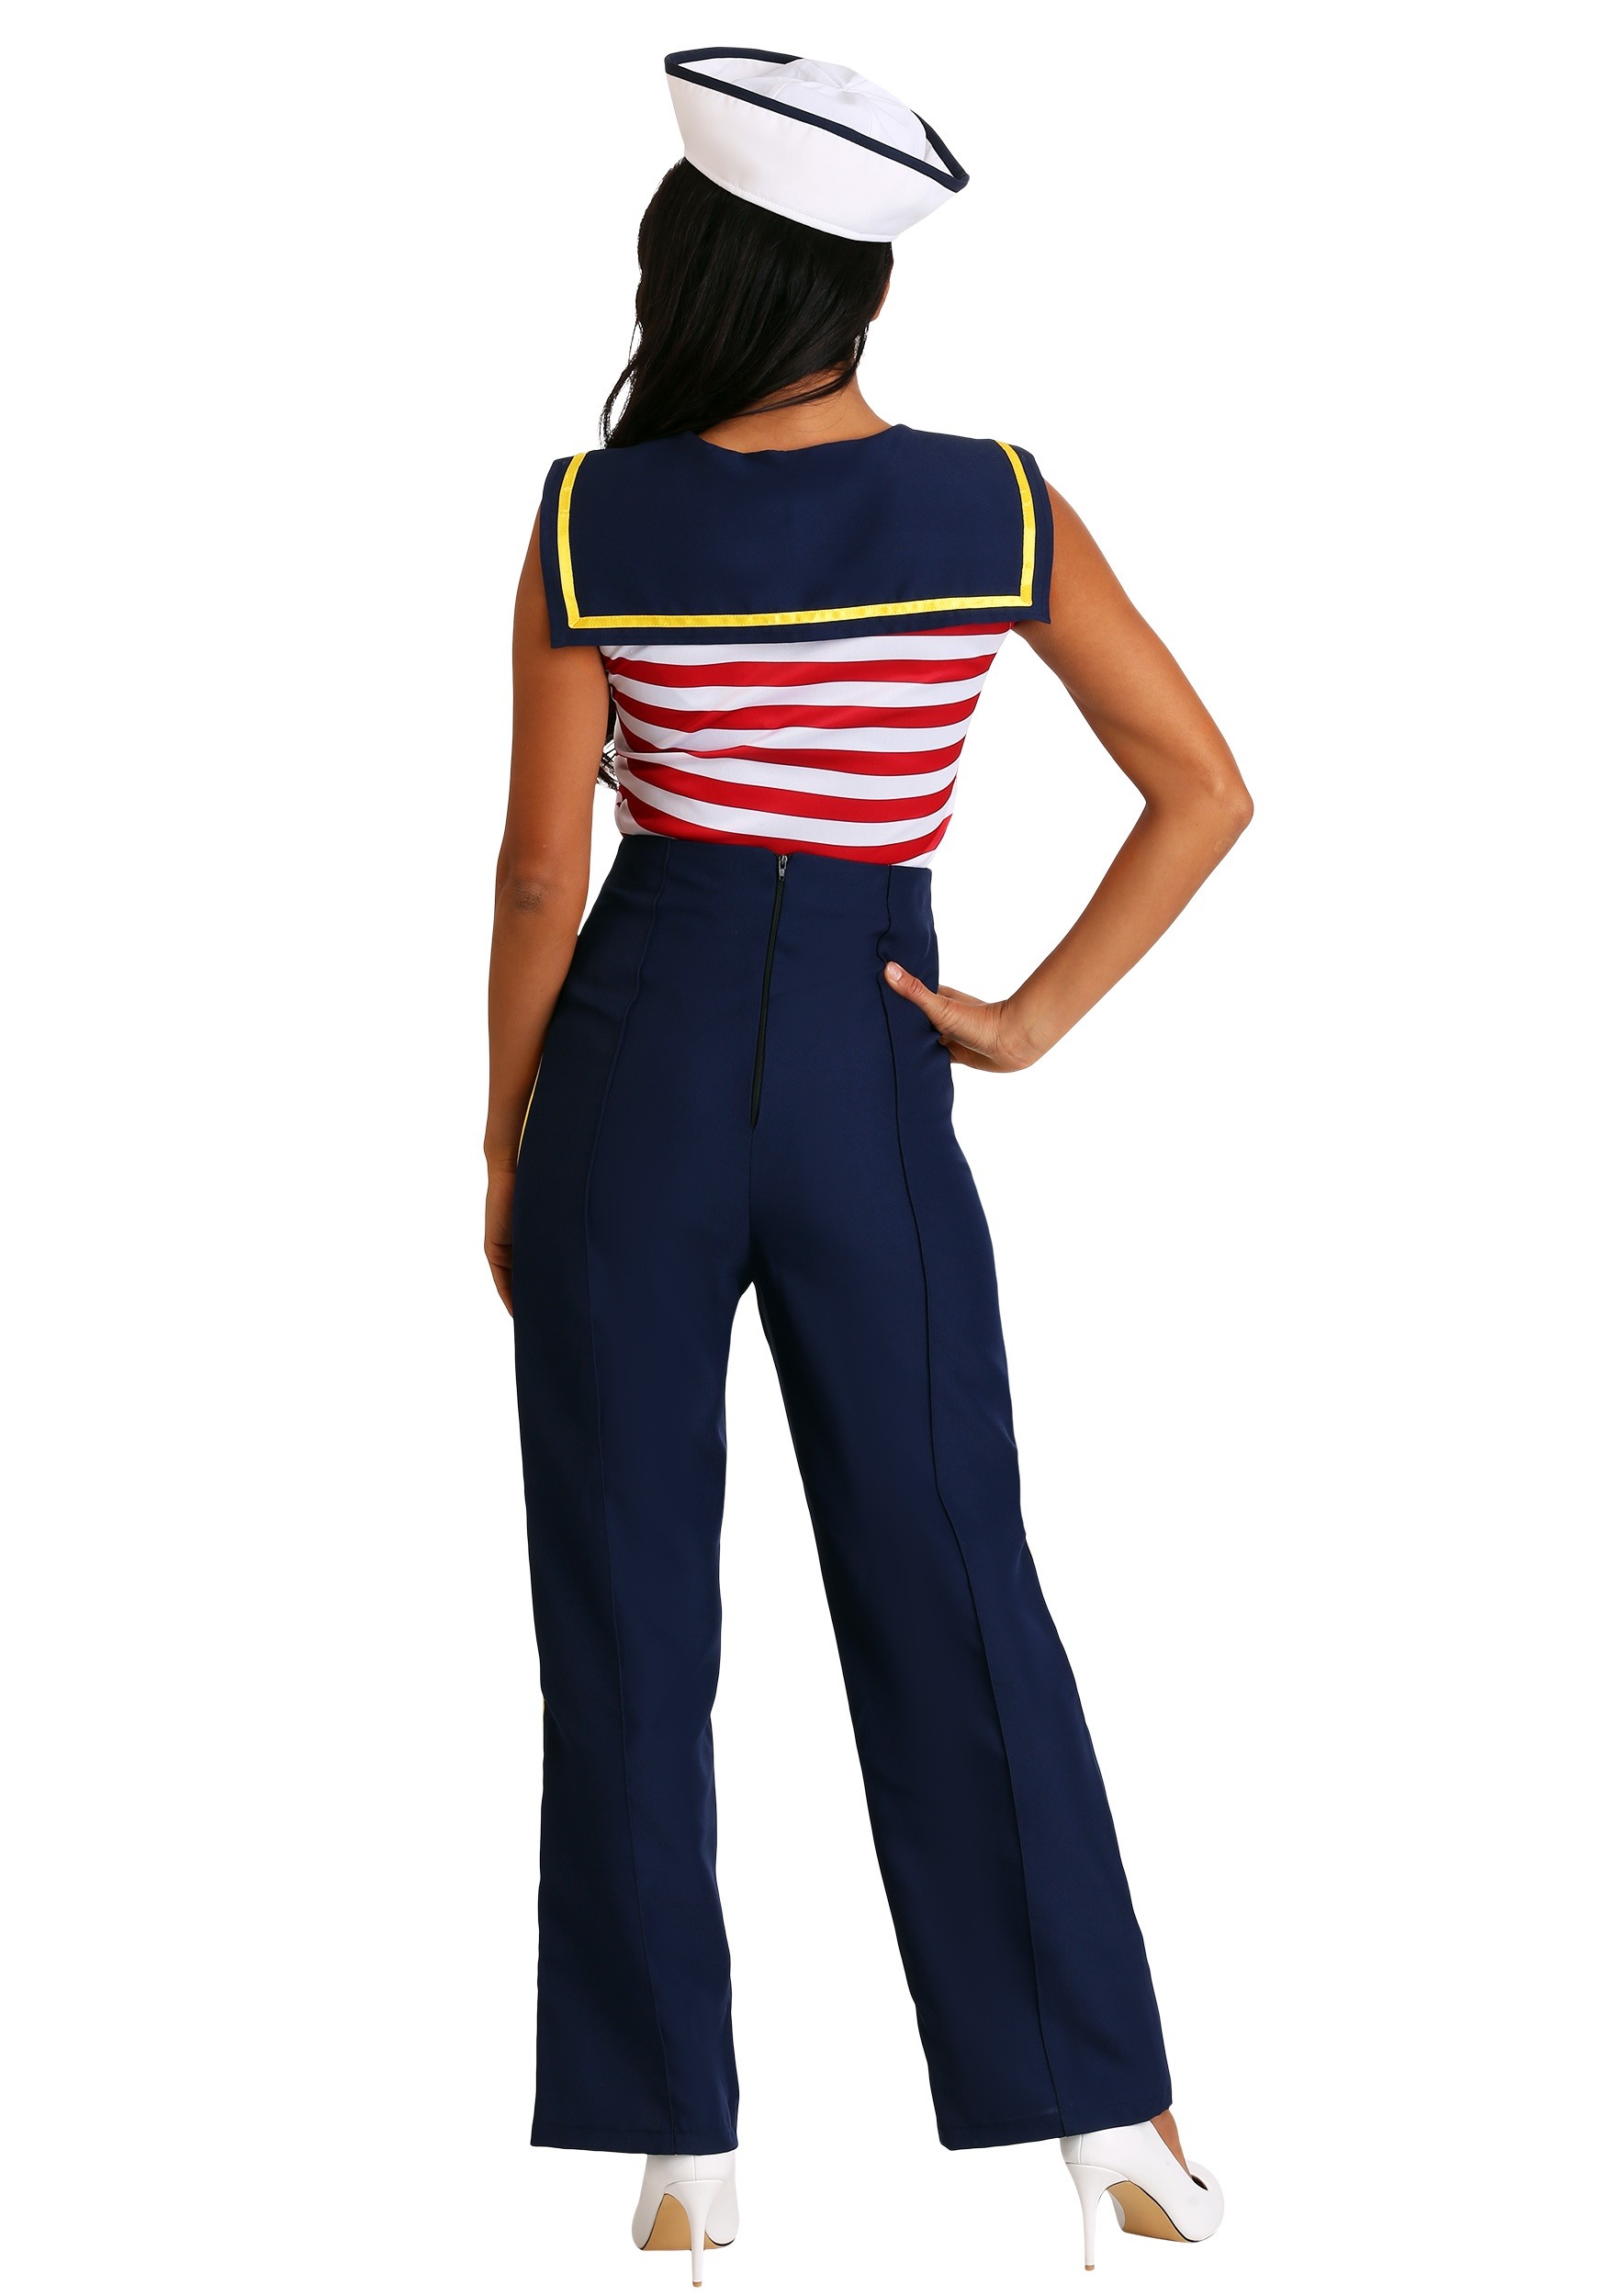 Perfect Pin Up Sailor Costume for Women